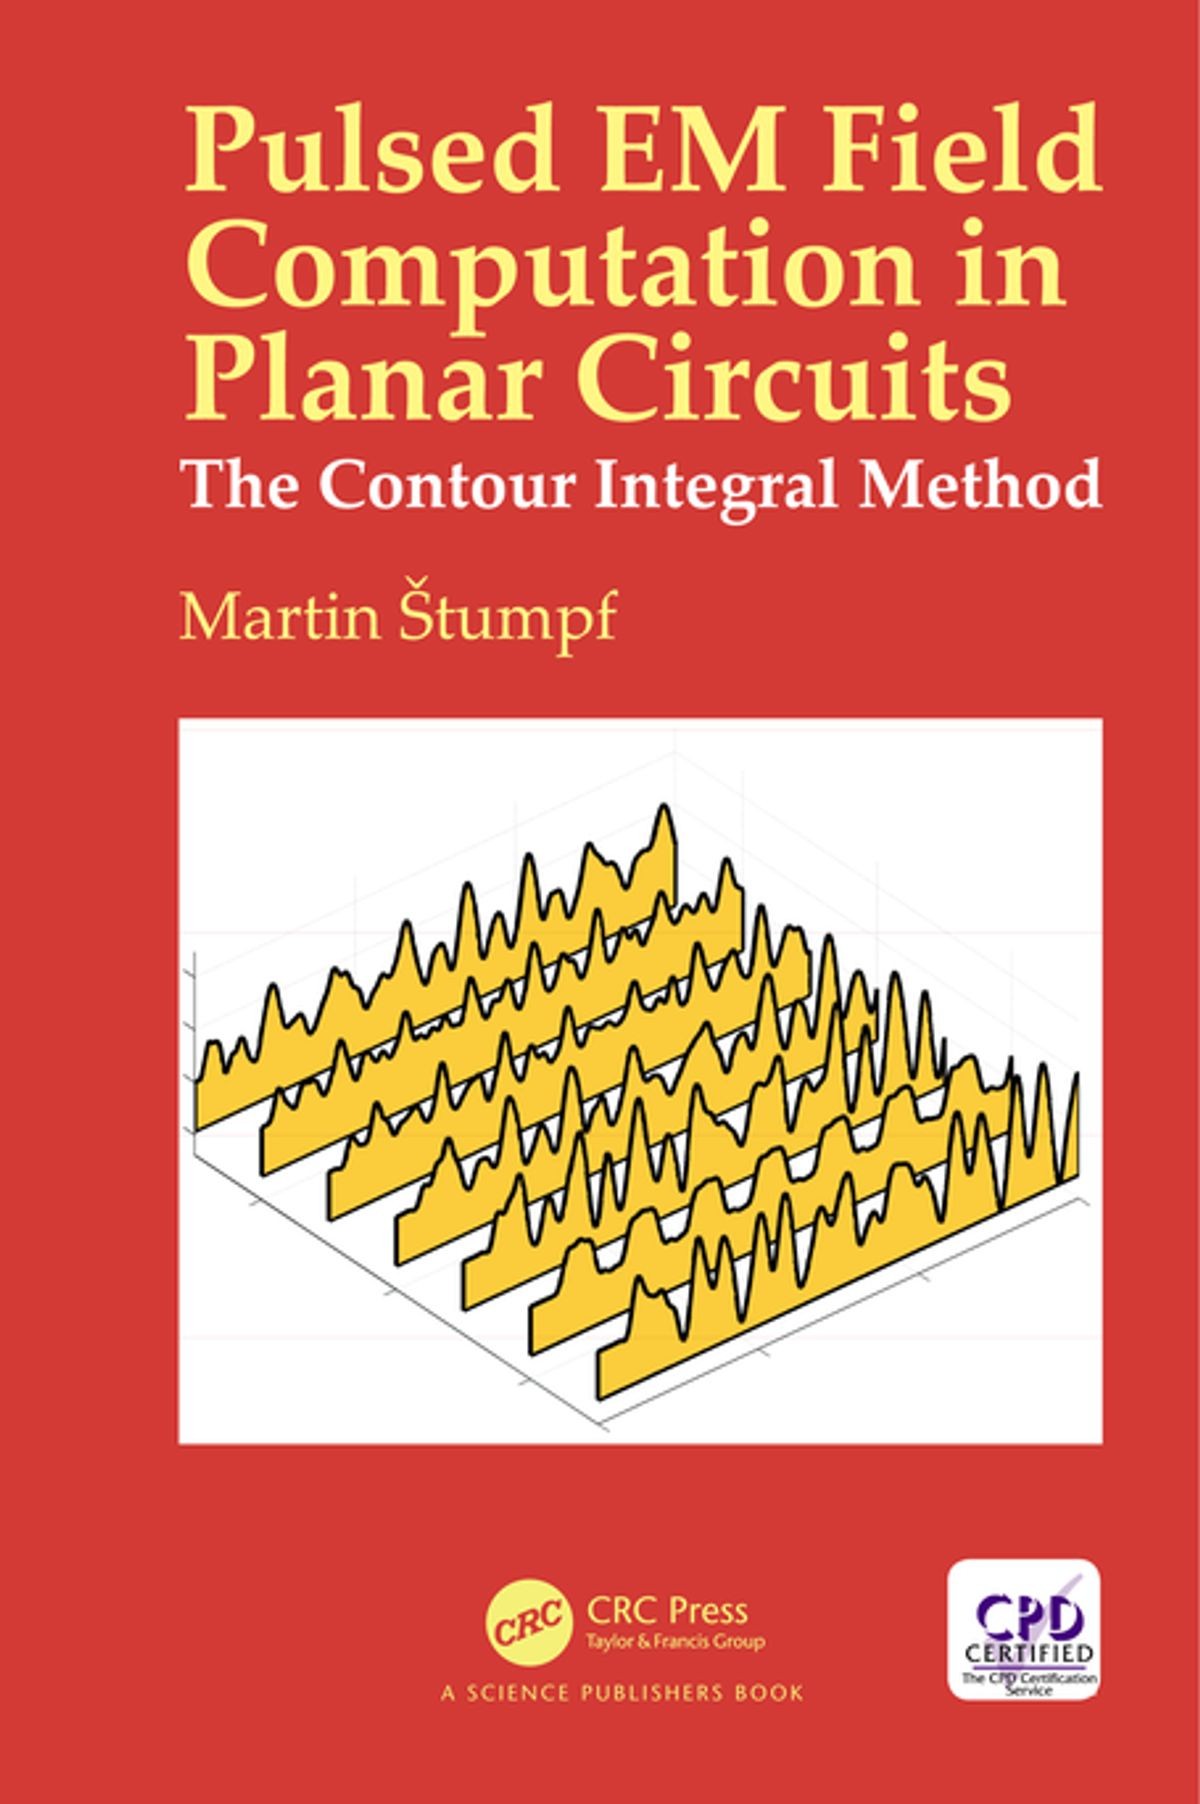 Pulsed EM Field Computation in Planar Circuits: The Contour Integral Method